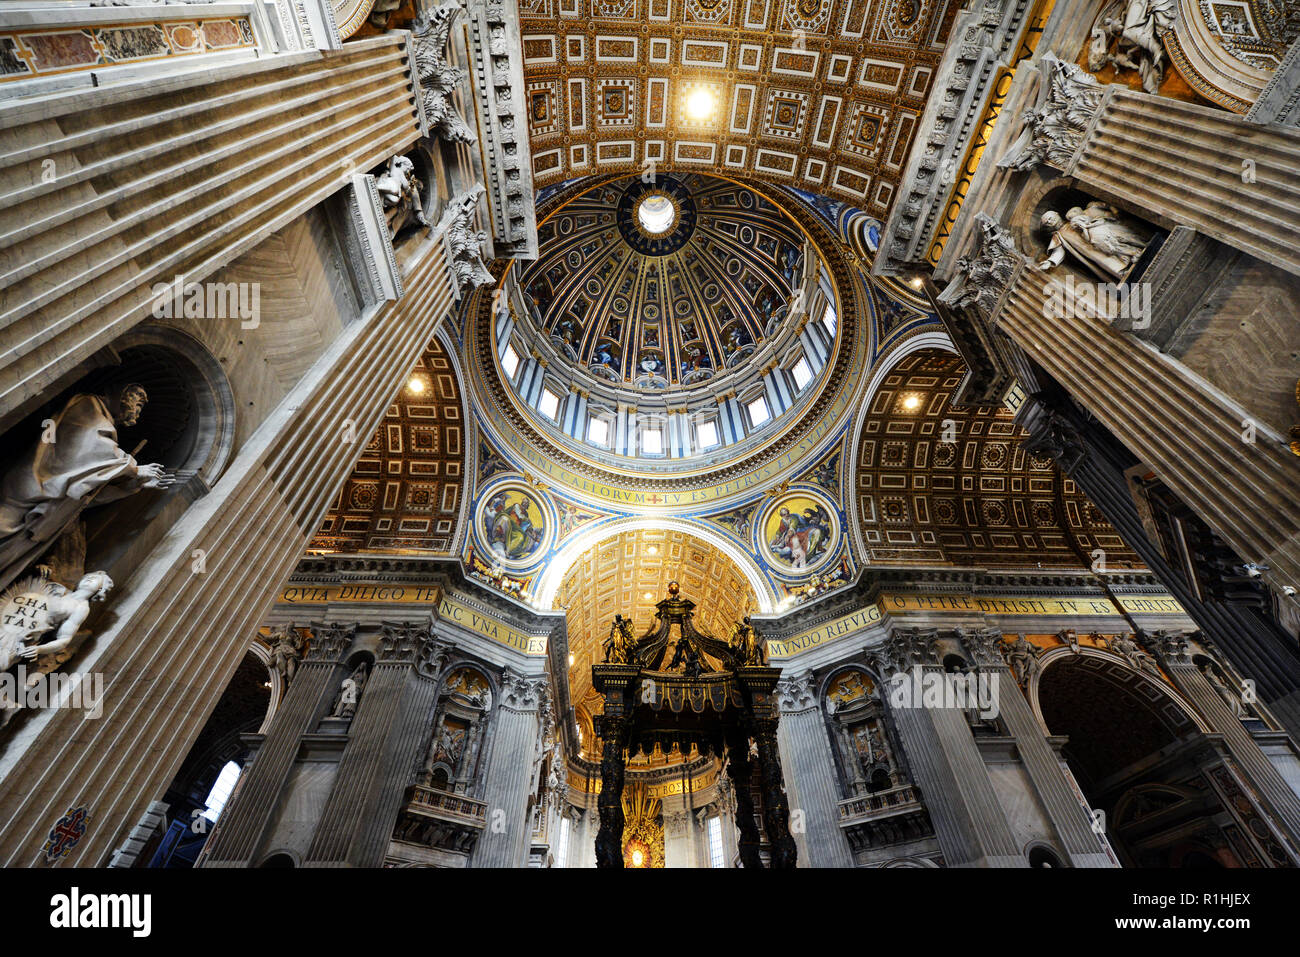 The beautiful interior of the Saint Peter's Basilica in the Vatican city. Stock Photo